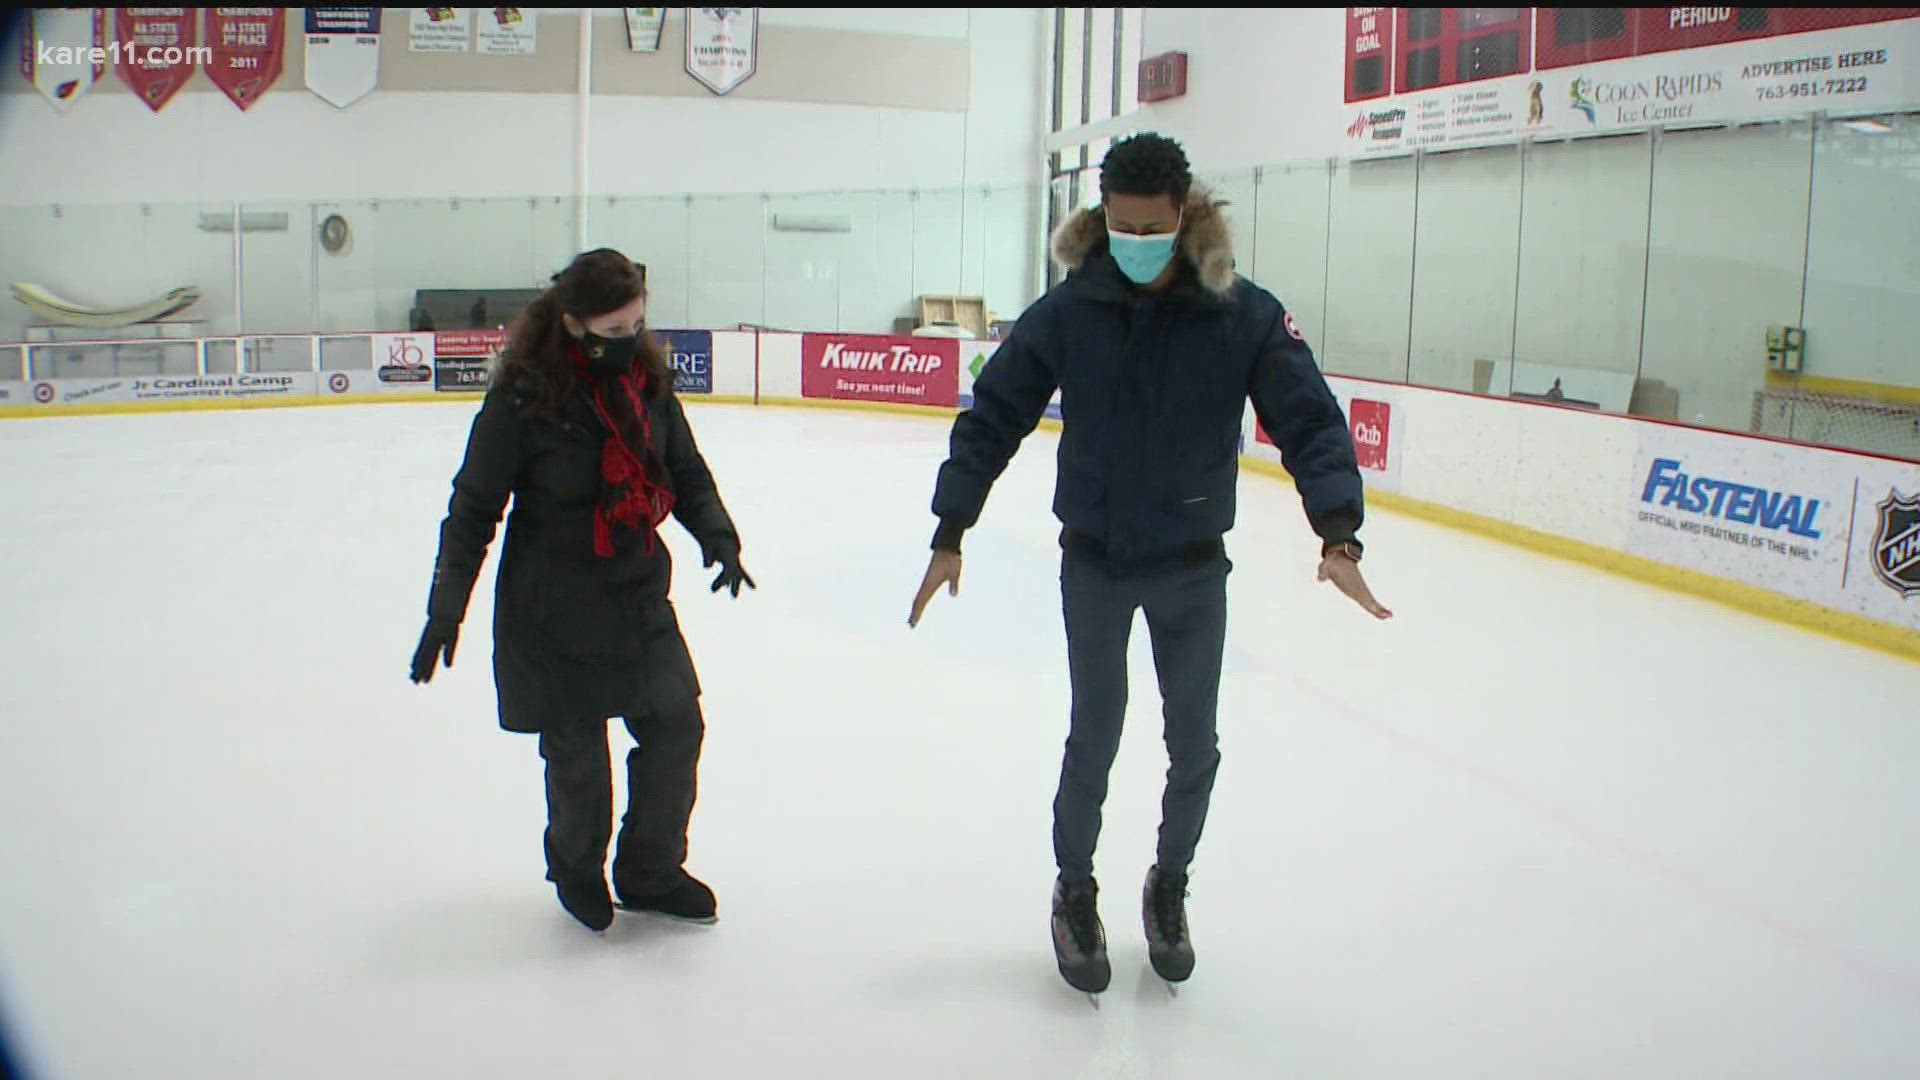 KARE 11's own Guy Brown is taking to the ice to try out some of the events in the Winter Olympics.